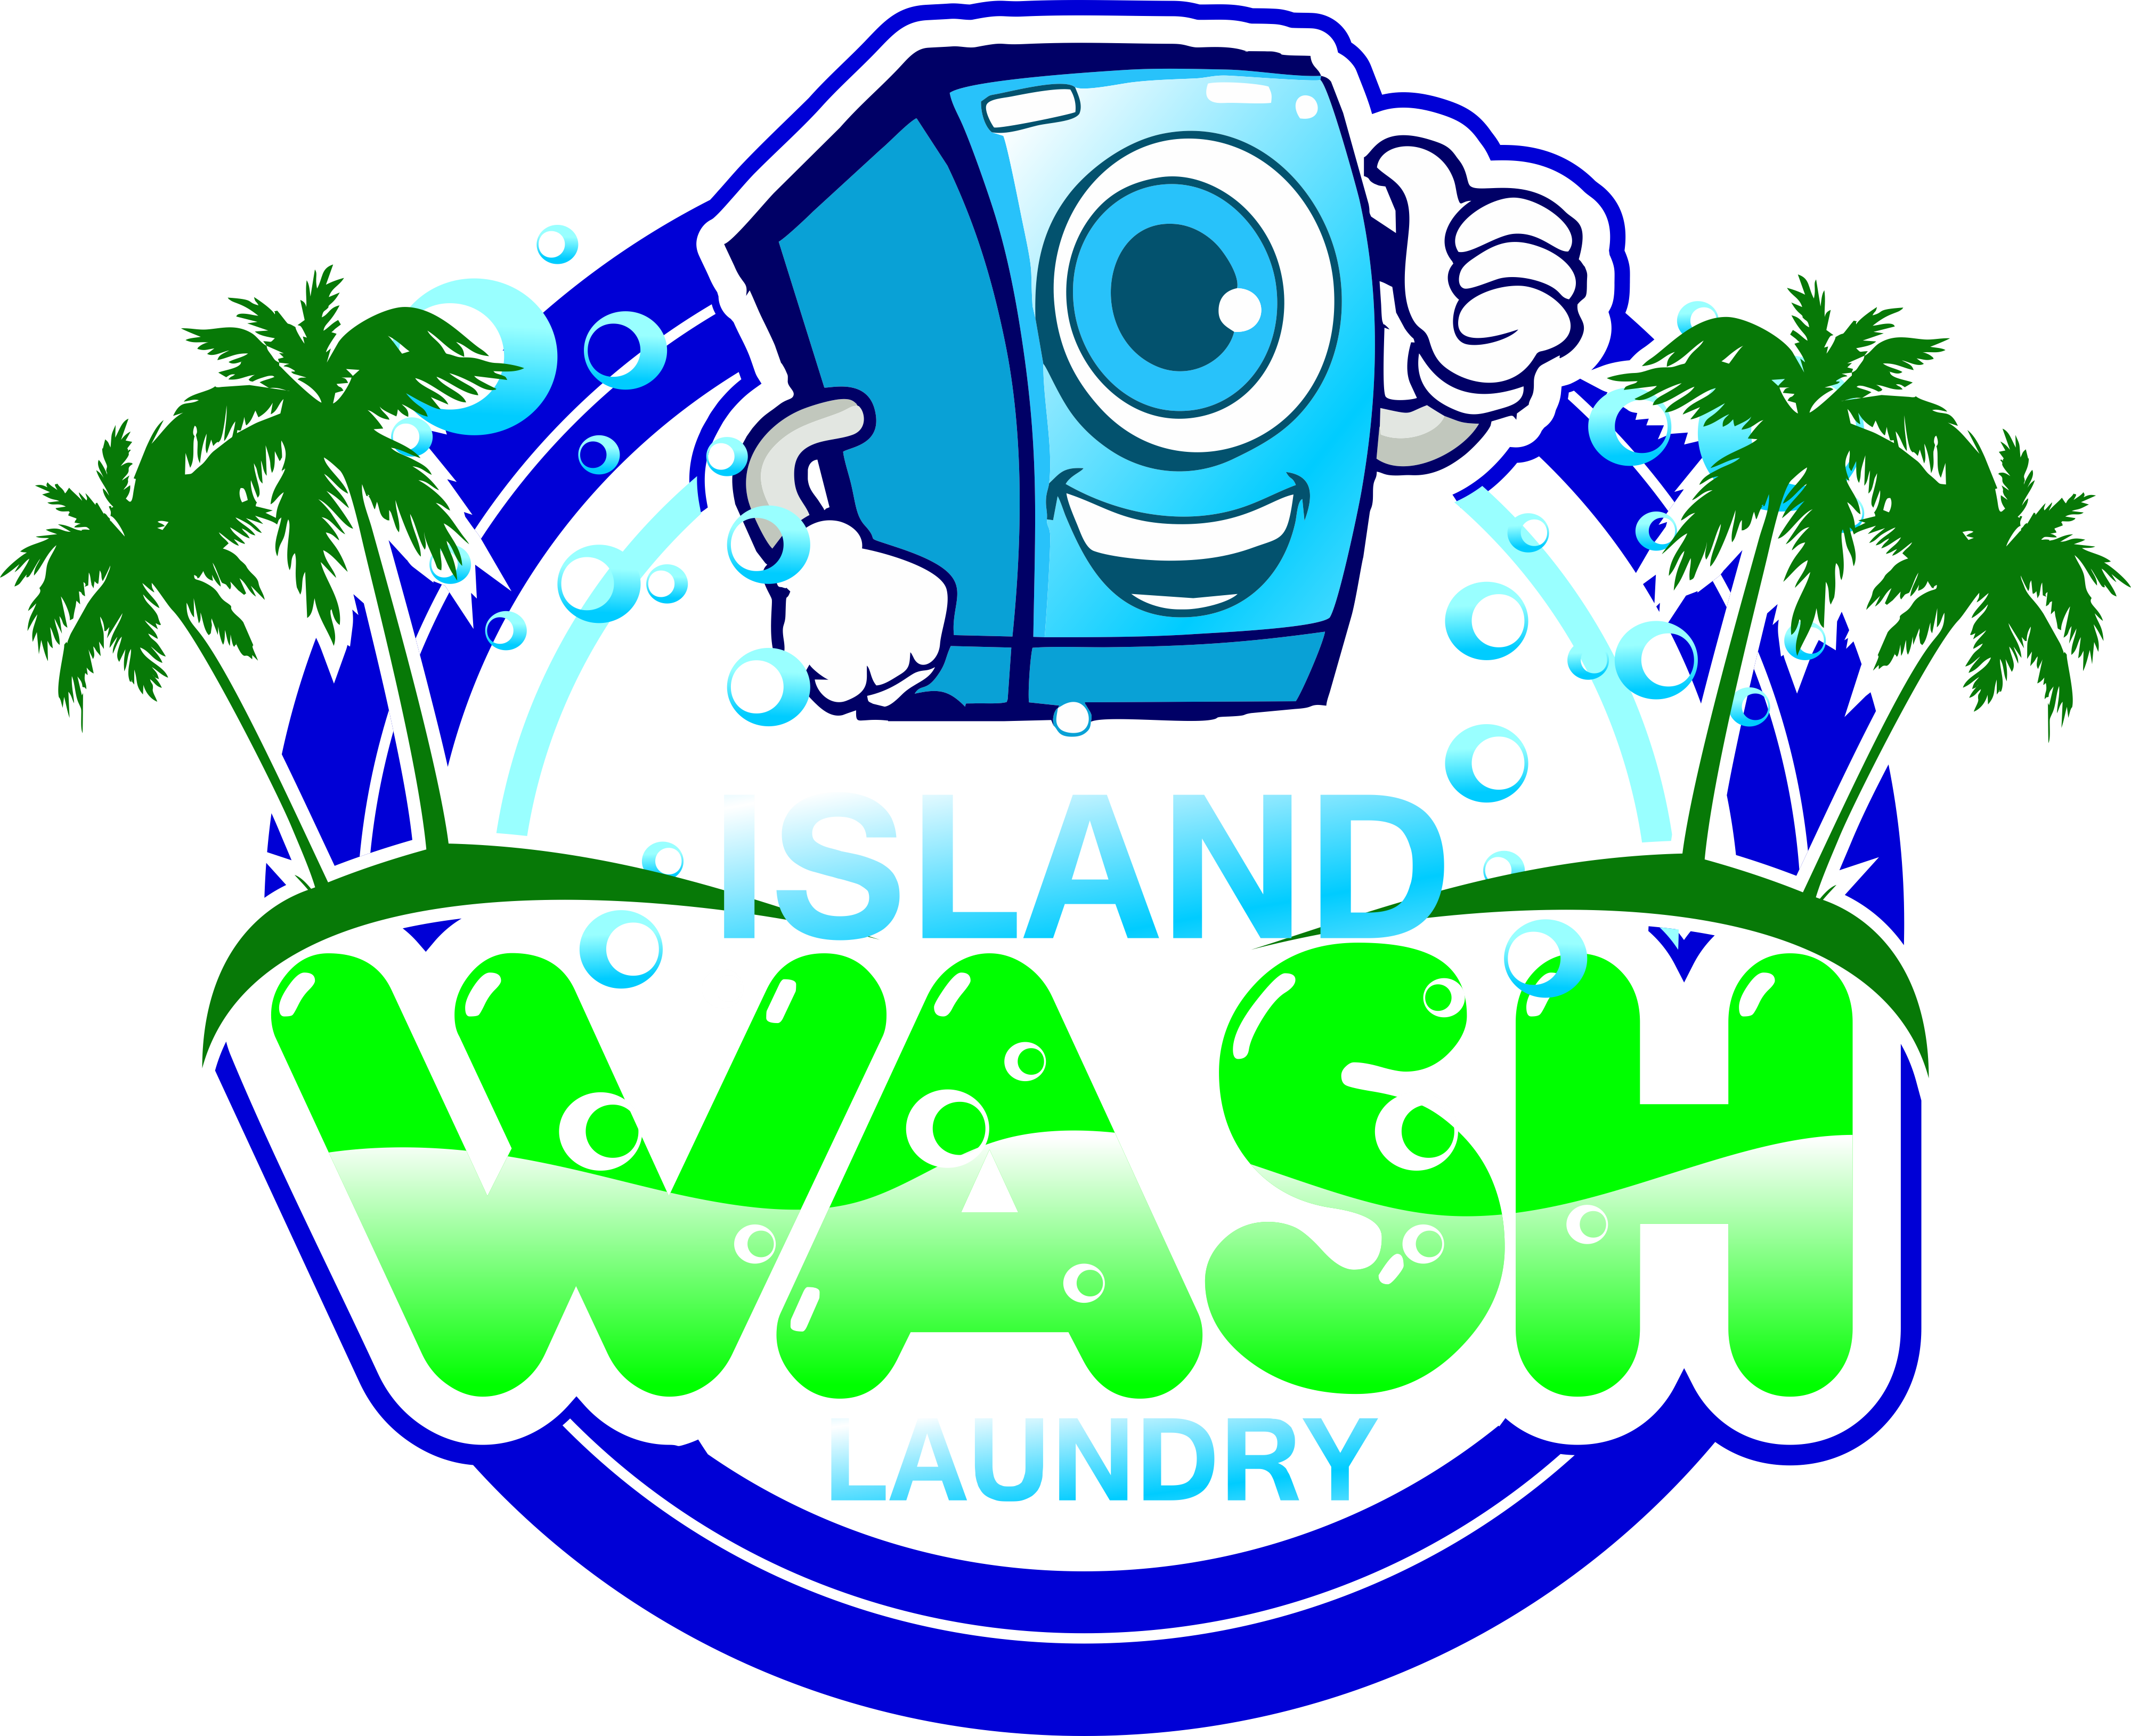 Laundry Service Provider Queens